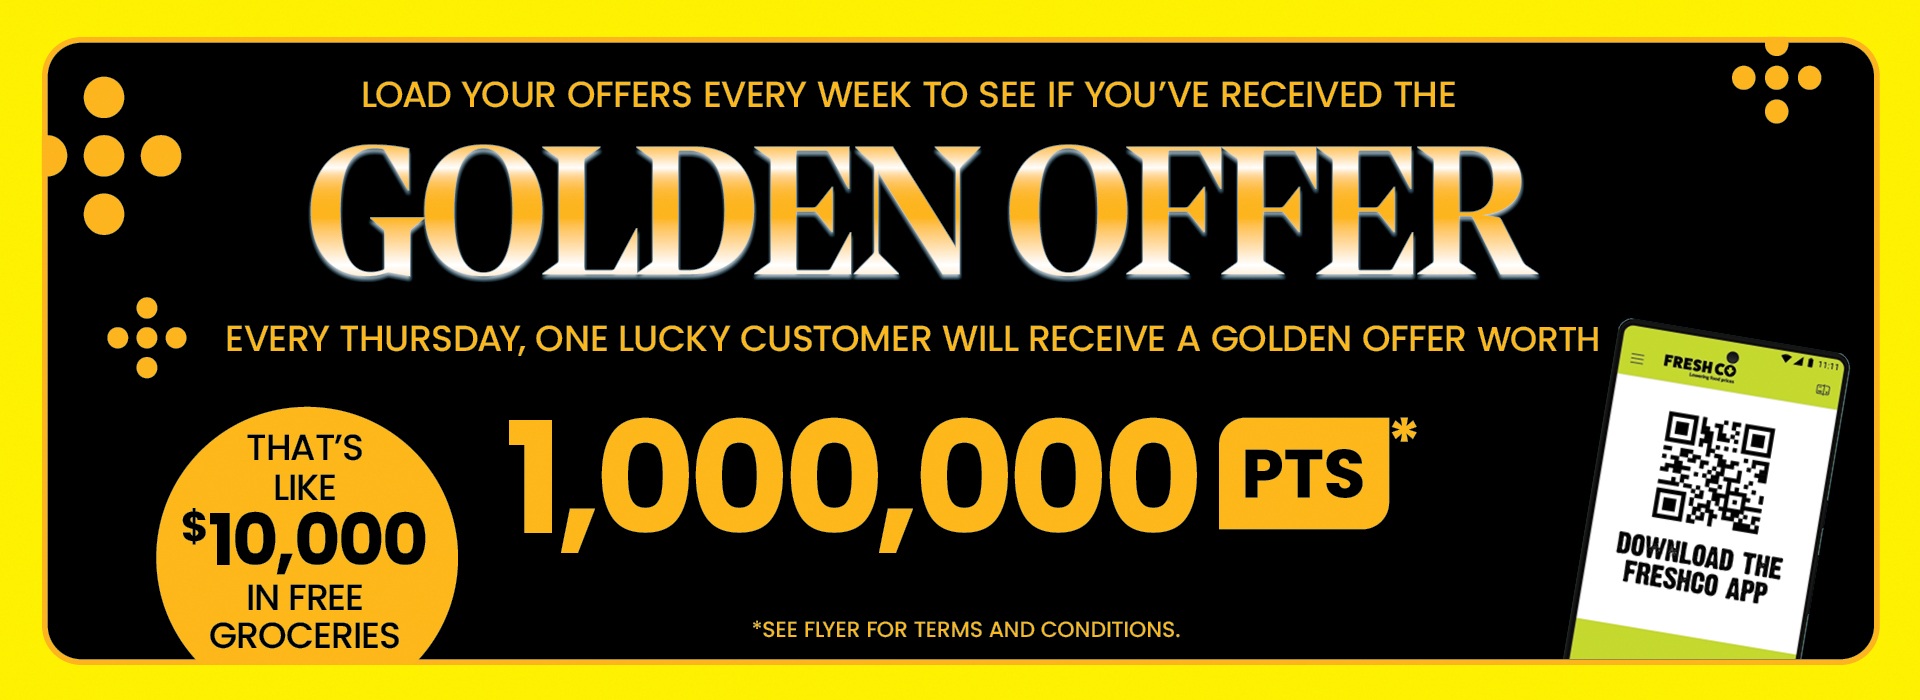 Text reading," Load your offer every week to see if you've received the "Golden Offer" every Thursday; one lucky customer will receive a golden offer worth 1,000,000 points. That's $10,000 in free groceries; see flyers for terms and conditions."